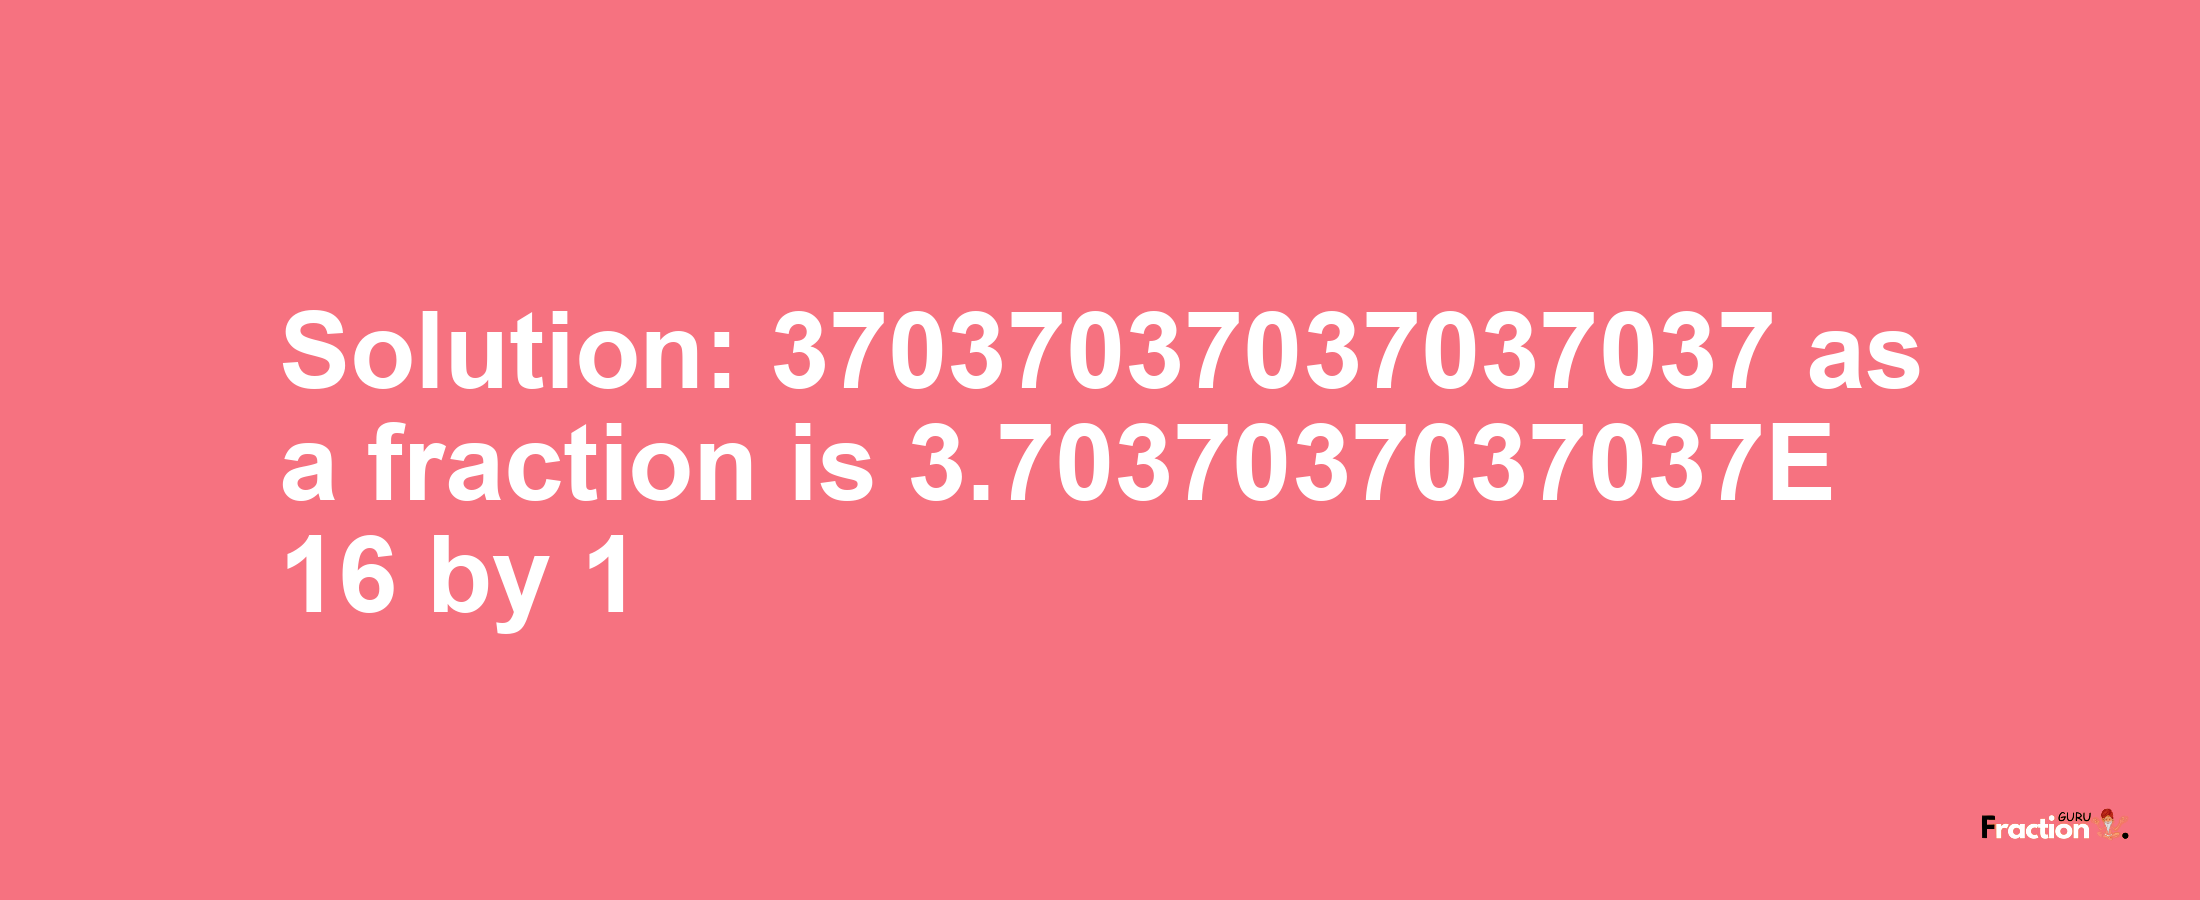 Solution:37037037037037037 as a fraction is 3.7037037037037E+16/1